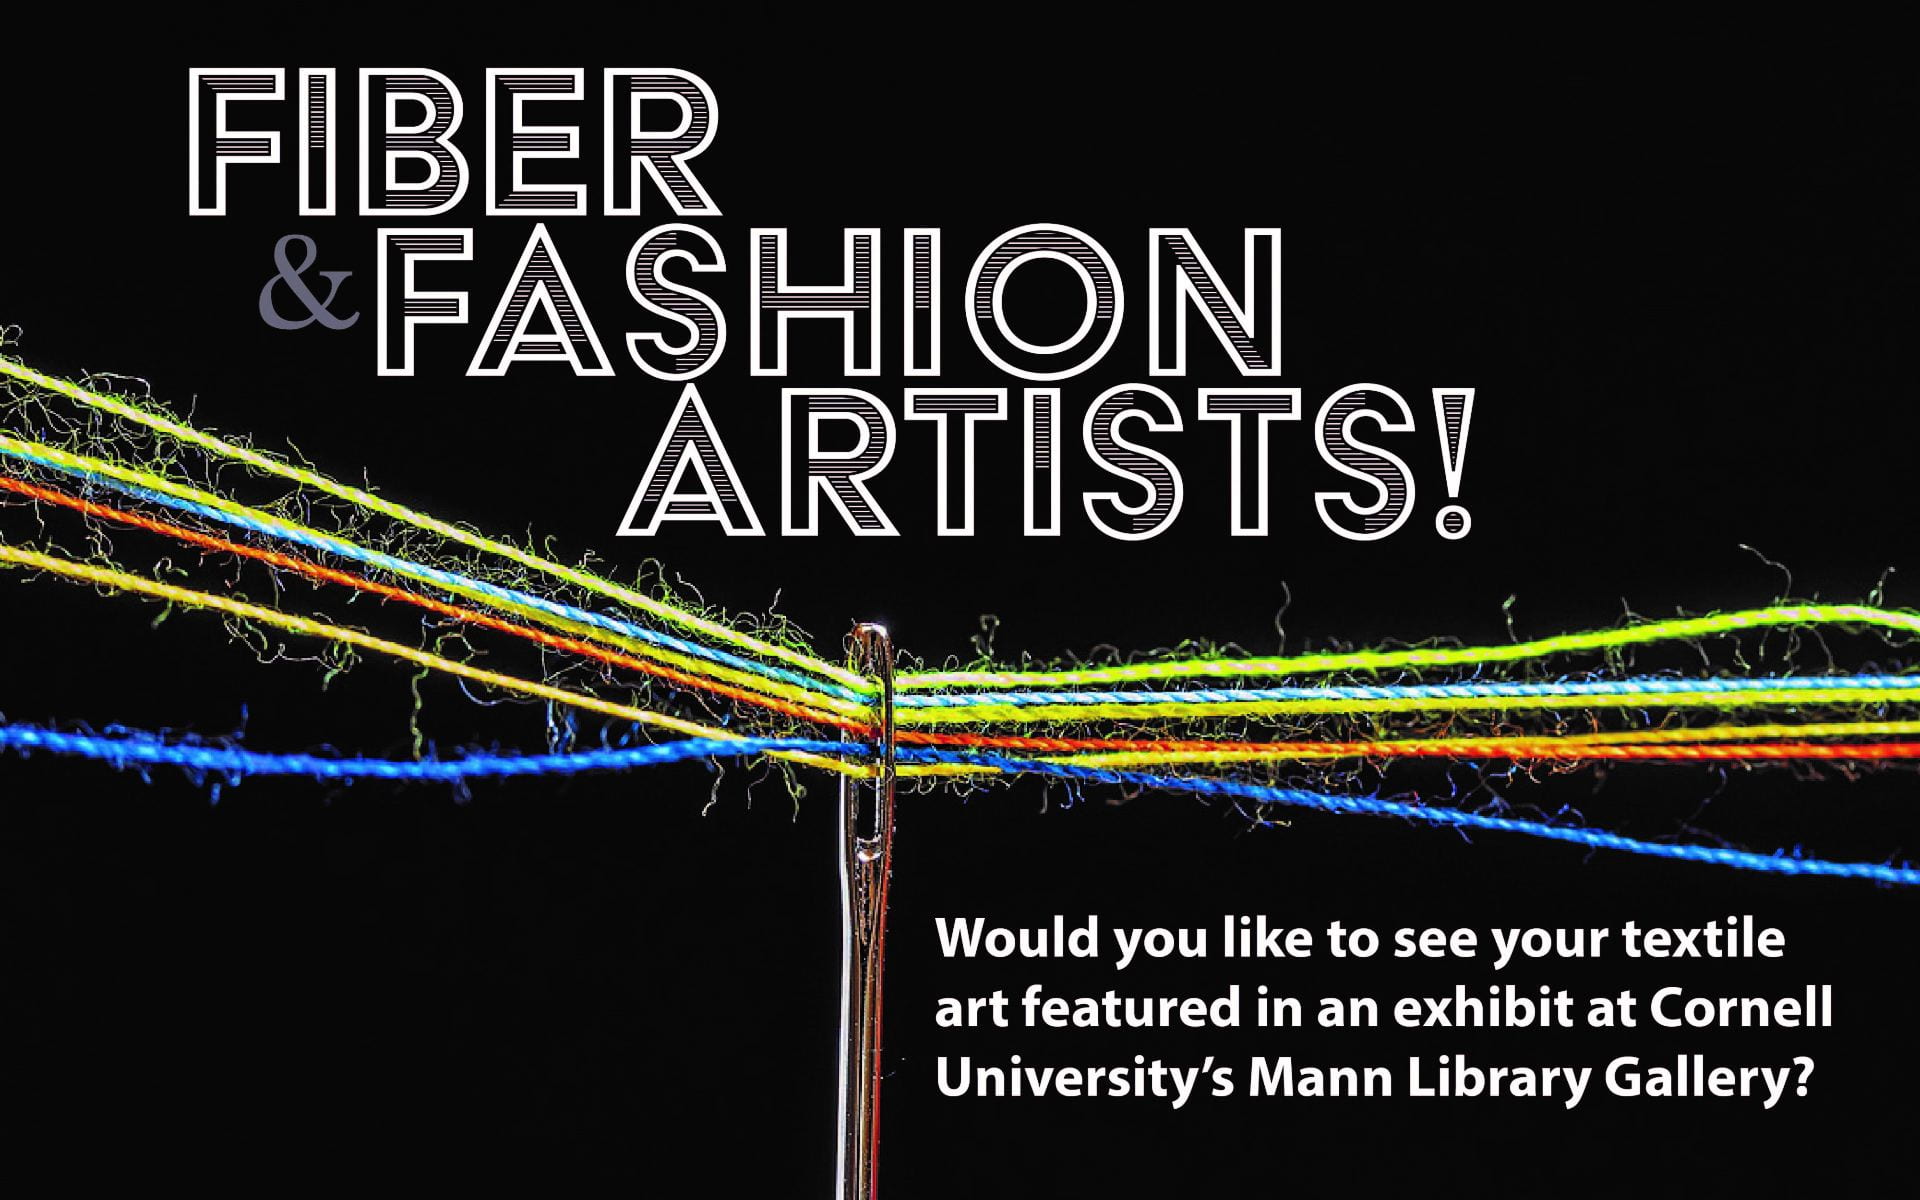 Call for Fiber and Fashion Artists